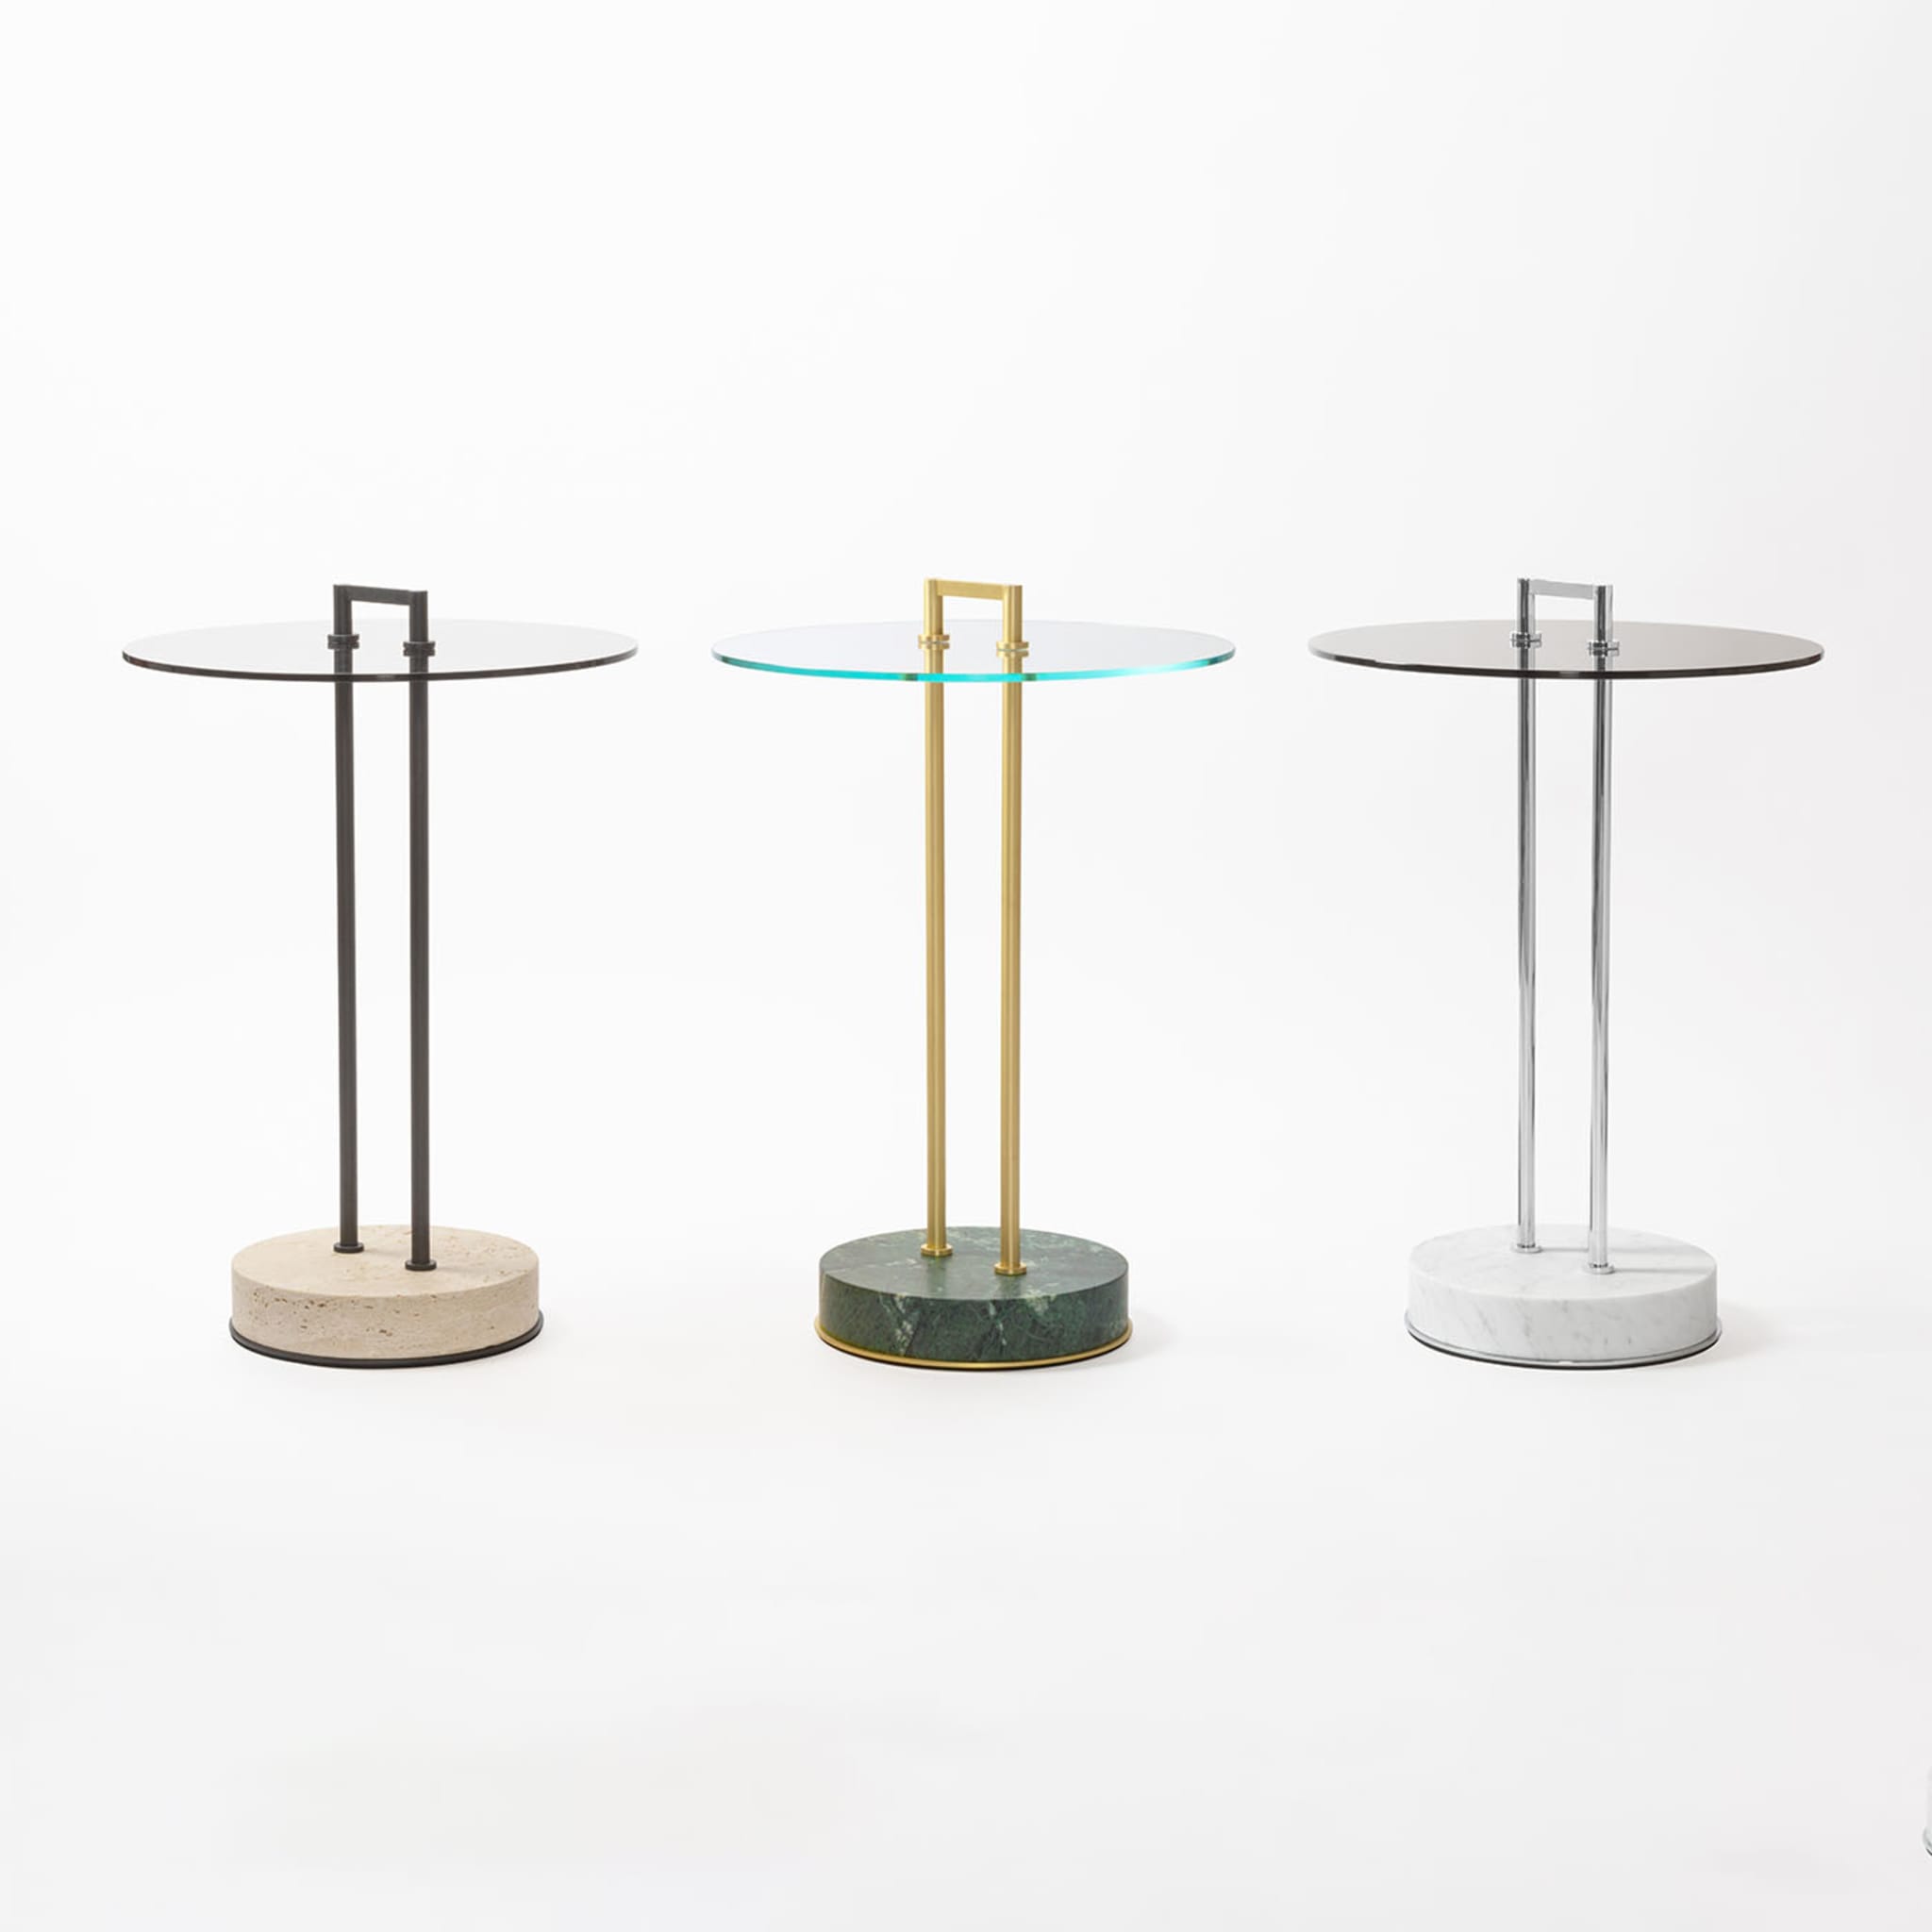 Urbino Marble Occasional Table #2 - Alternative view 2